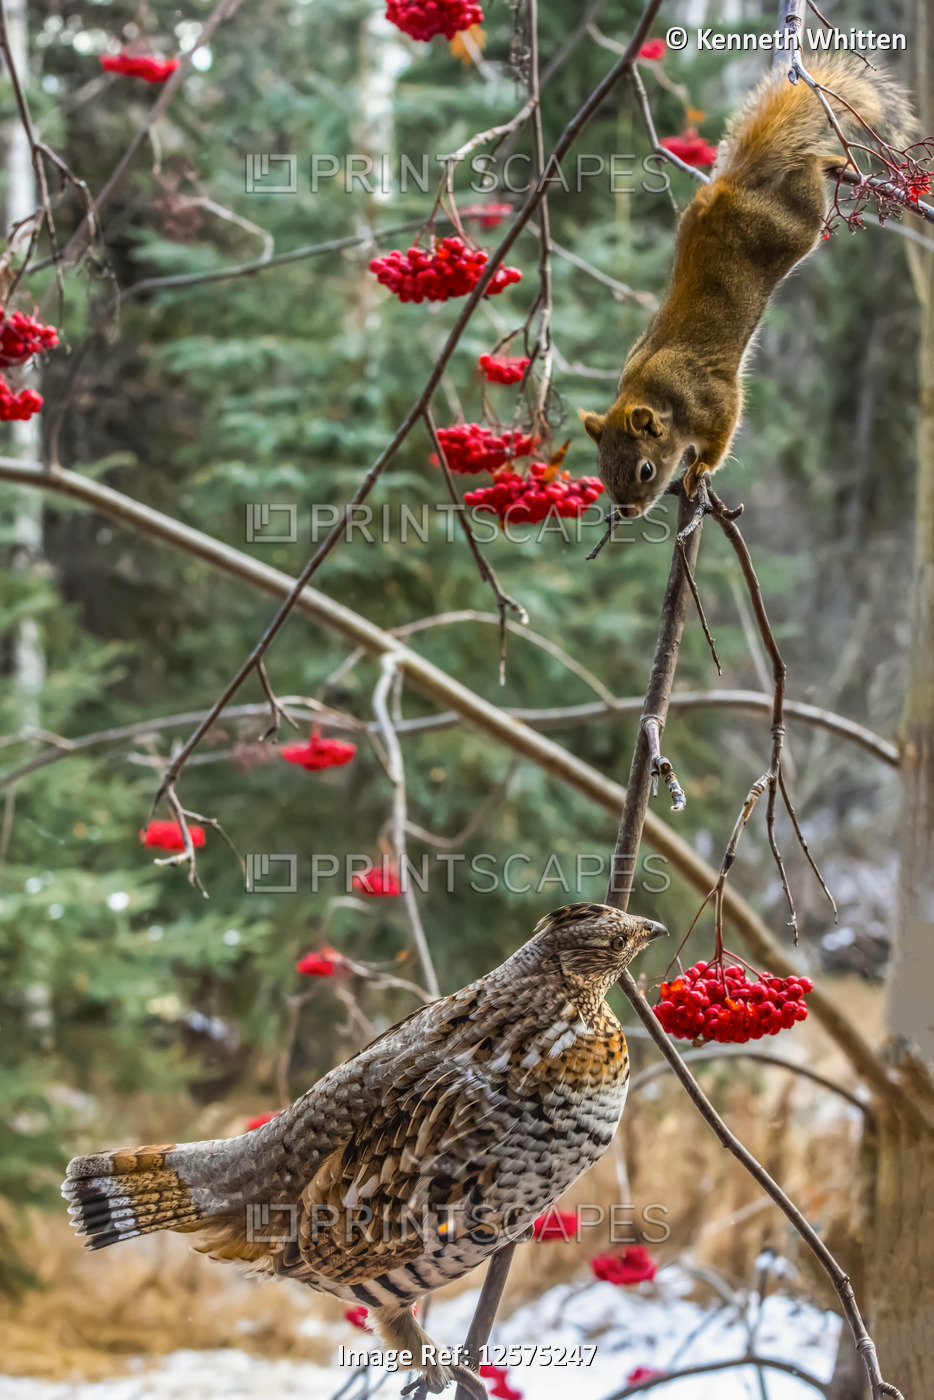 Ruffed Grouse and Red Squirrel approach each other on the branch of a Mountain Ash tree, Alaska, USA